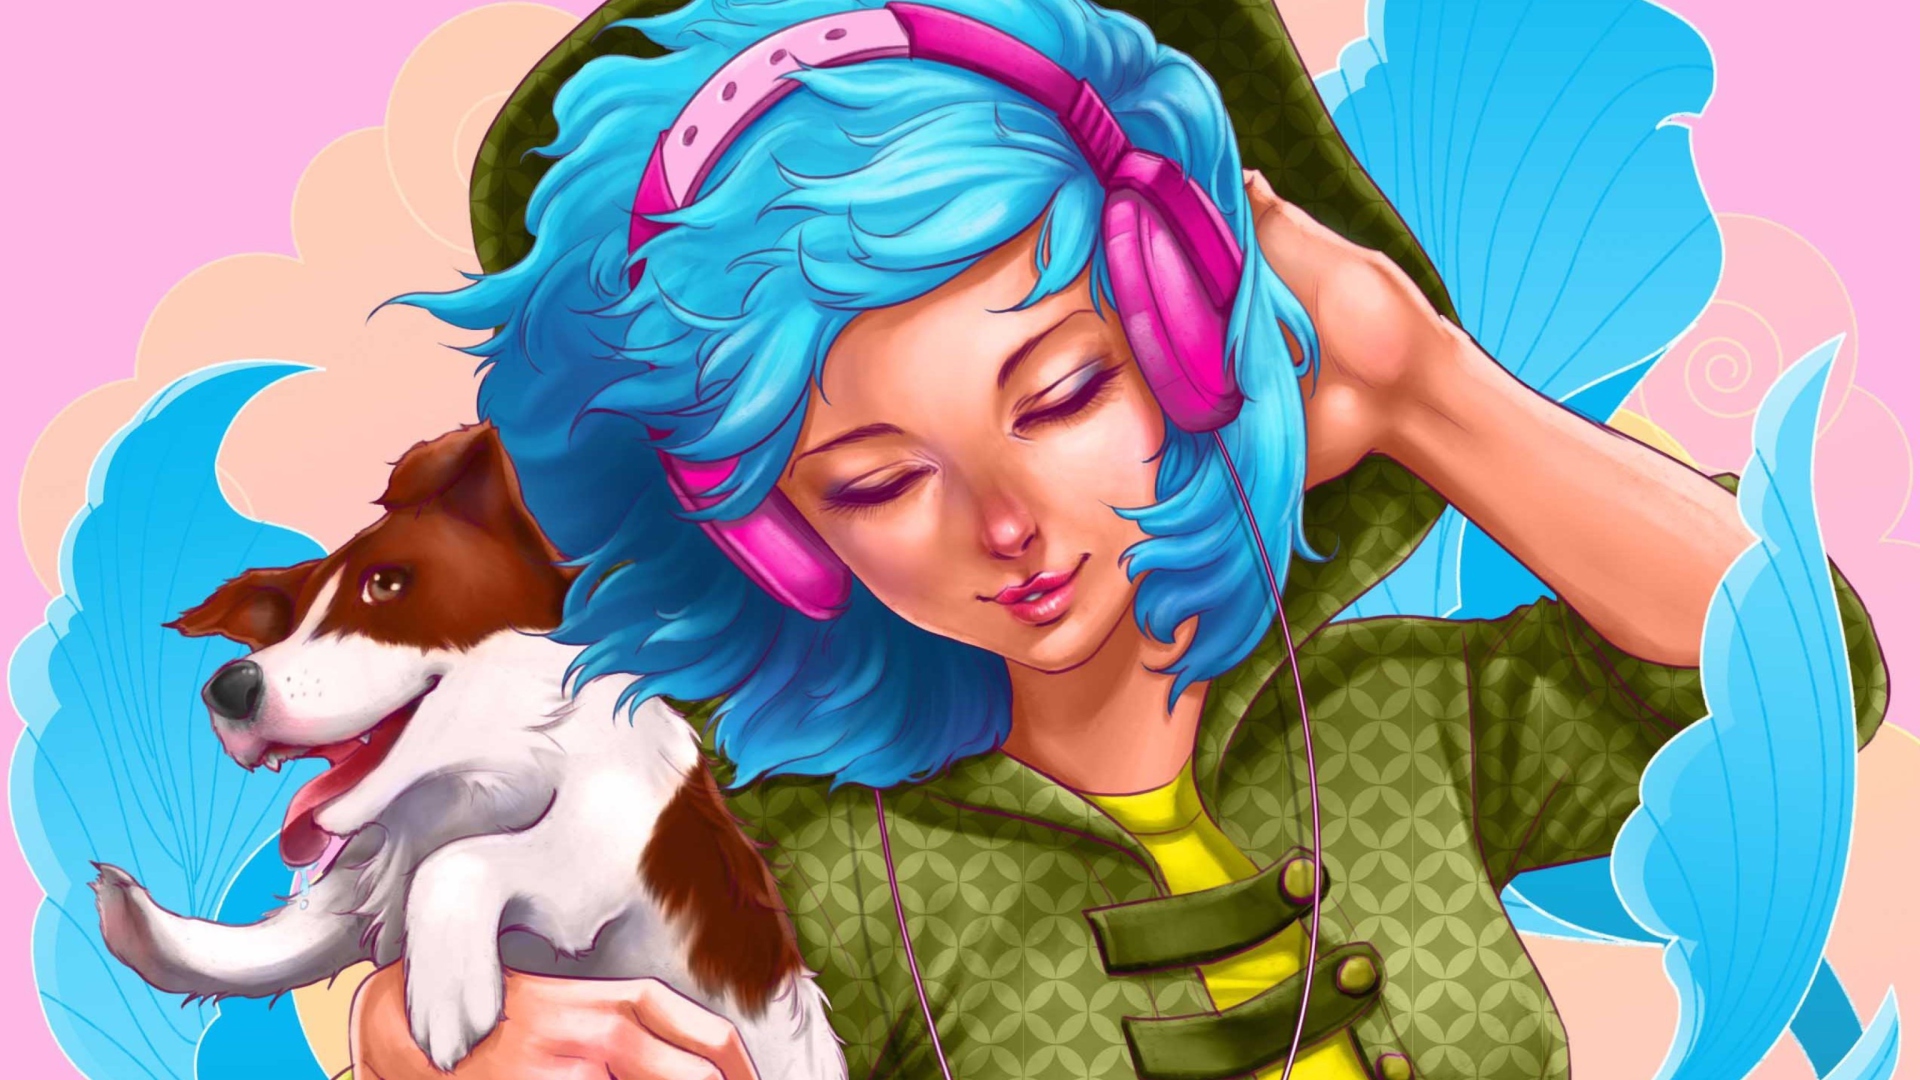 Girl With Blue Hair And Pink Headphones Drawing screenshot #1 1920x1080